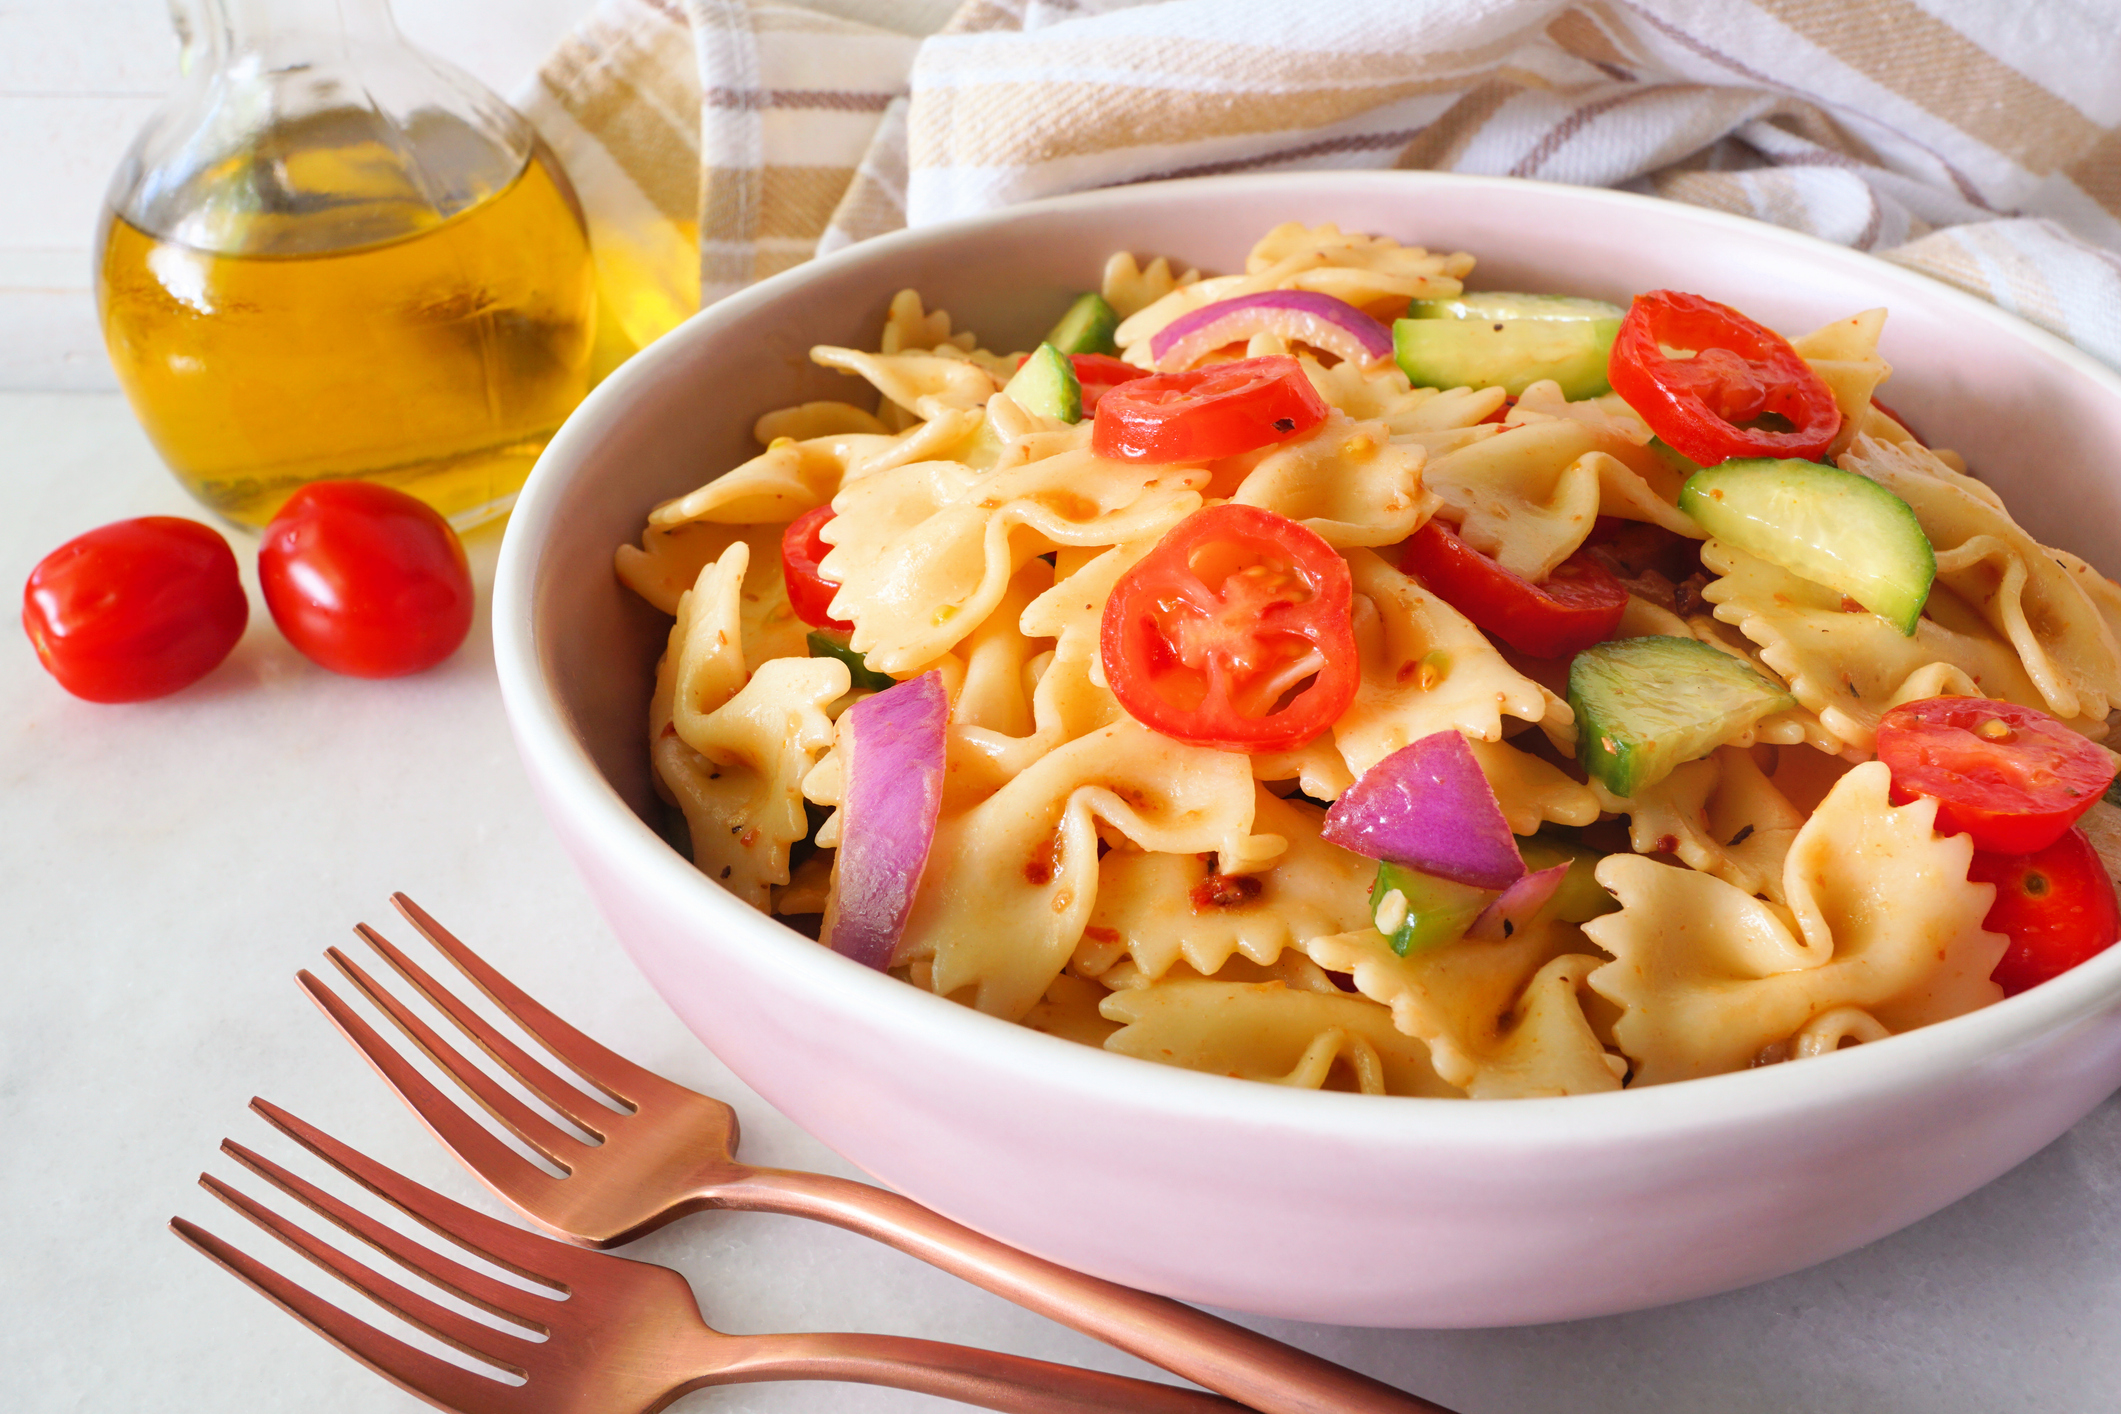 Traditional pasta salad with tomatoes, onion and cucumbers. Close up table scene with a white marble background.